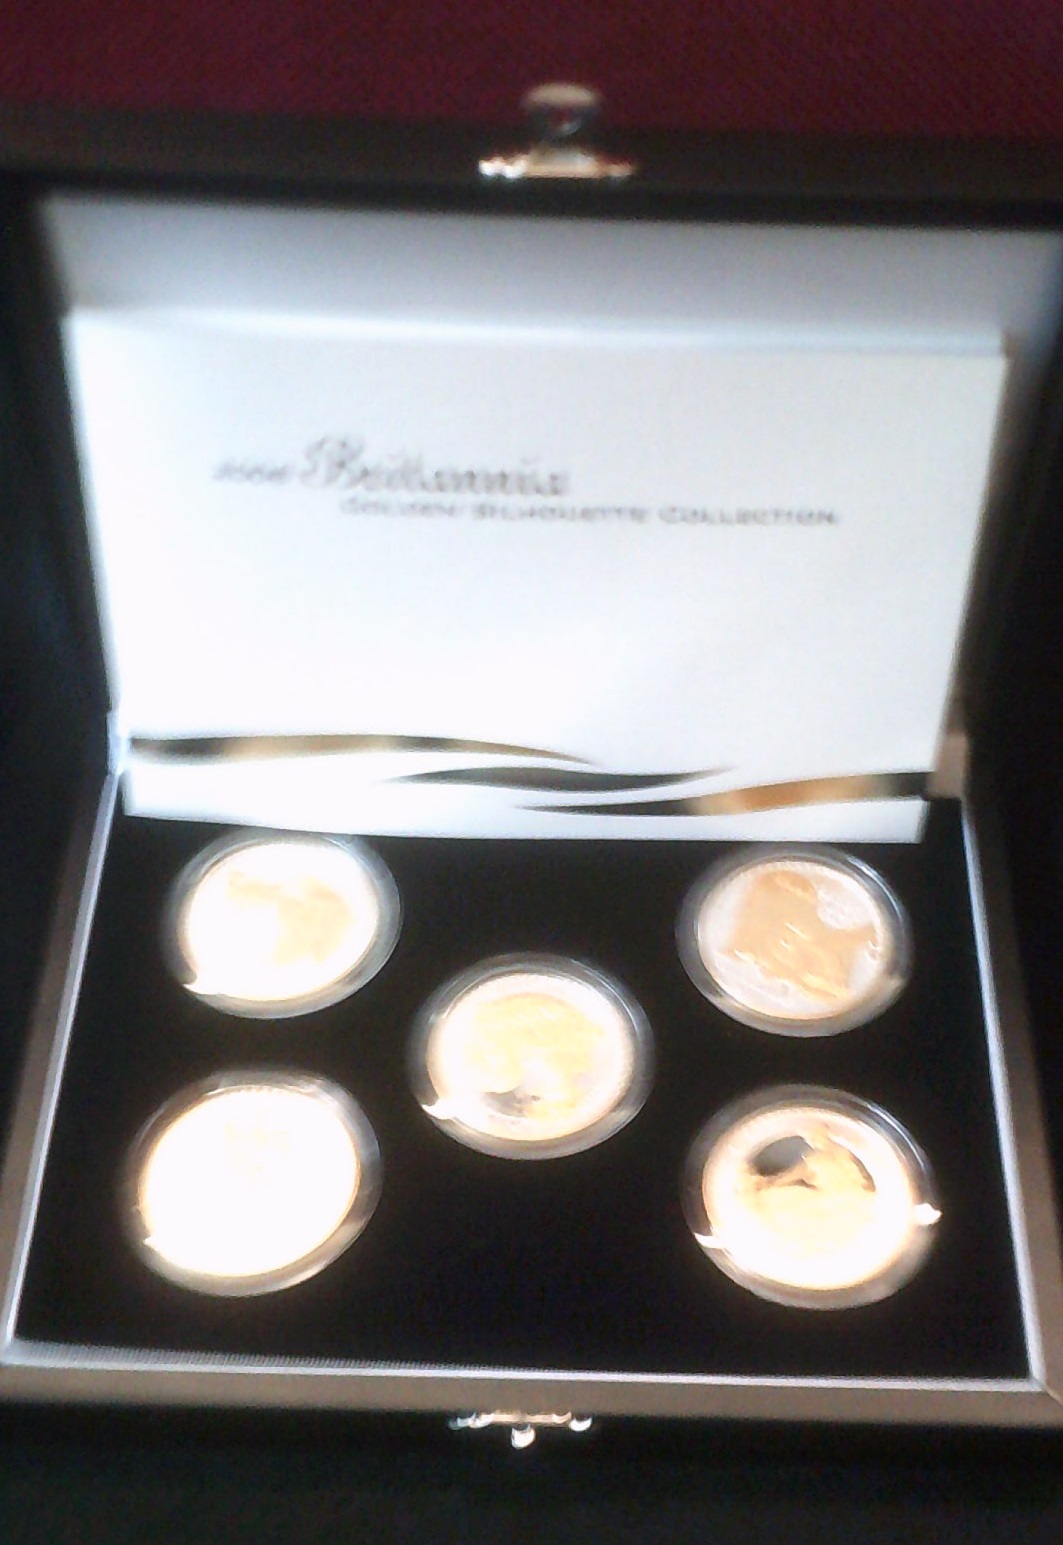 Great Britain 2006-Golden Silhouette Collection-Five Britannia coins each one ounce fine silver with